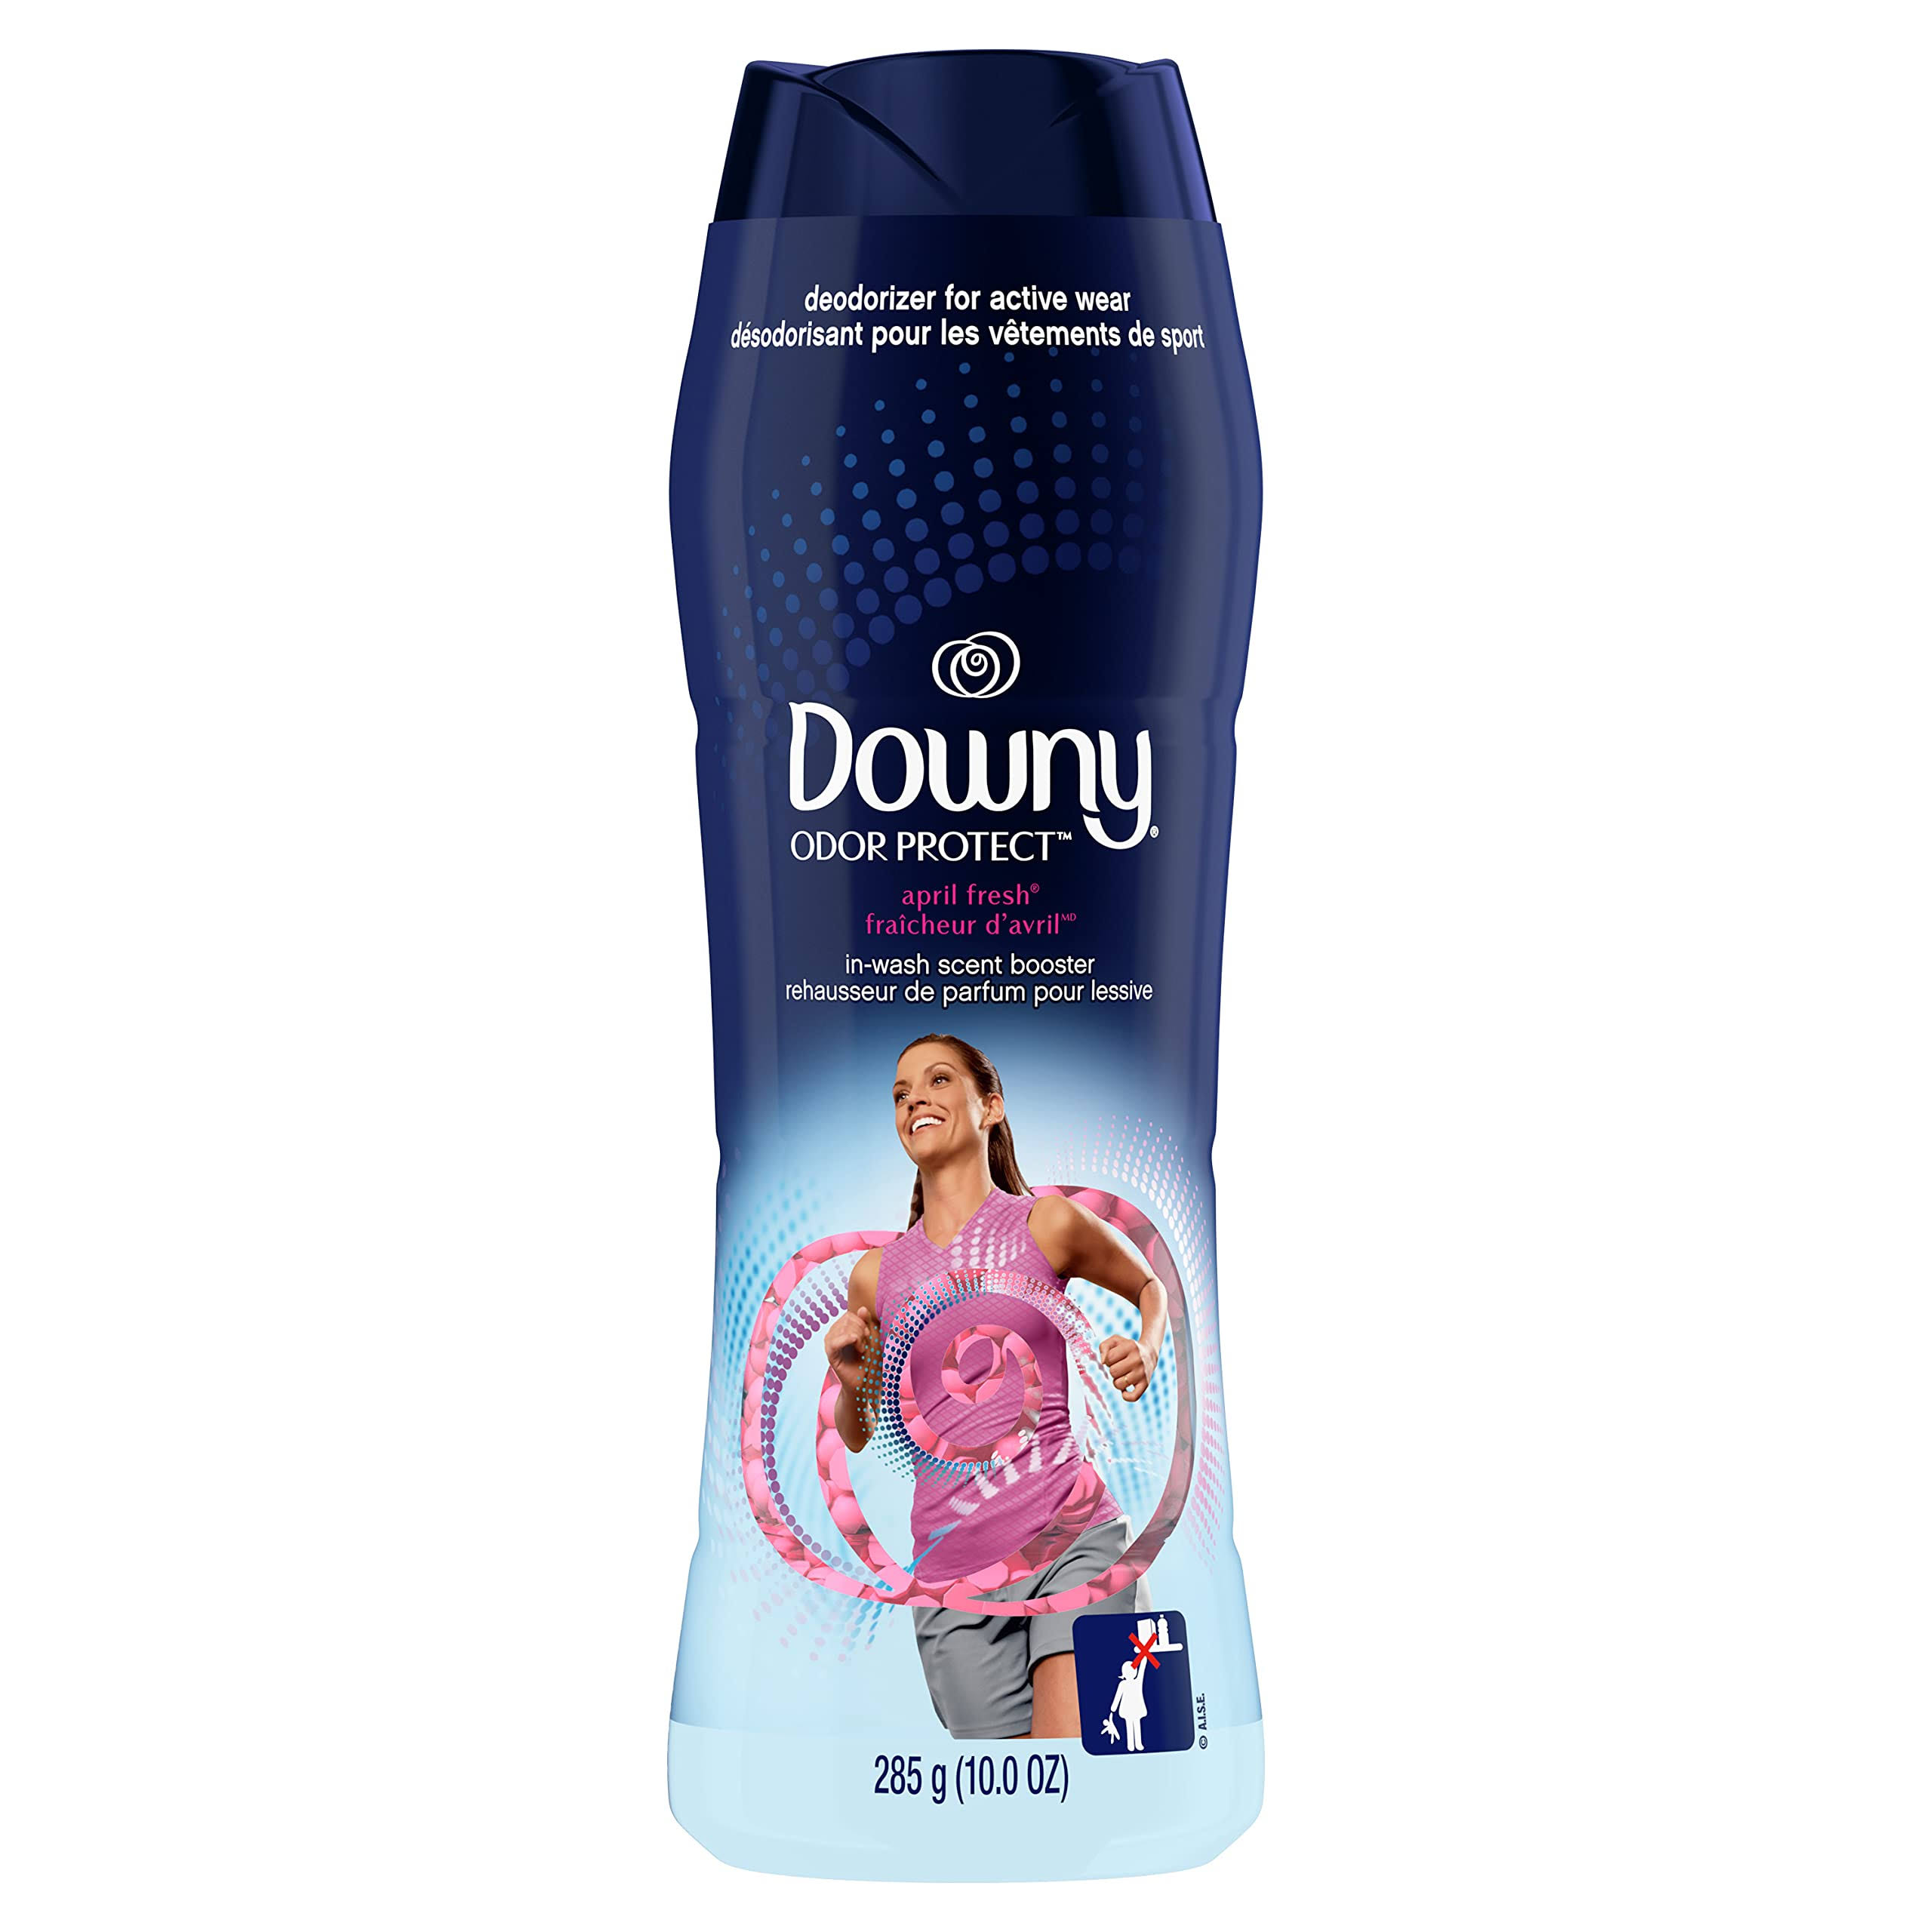 Downy Odor Protect Scent Booster, In-wash, April Fresh - 285 g